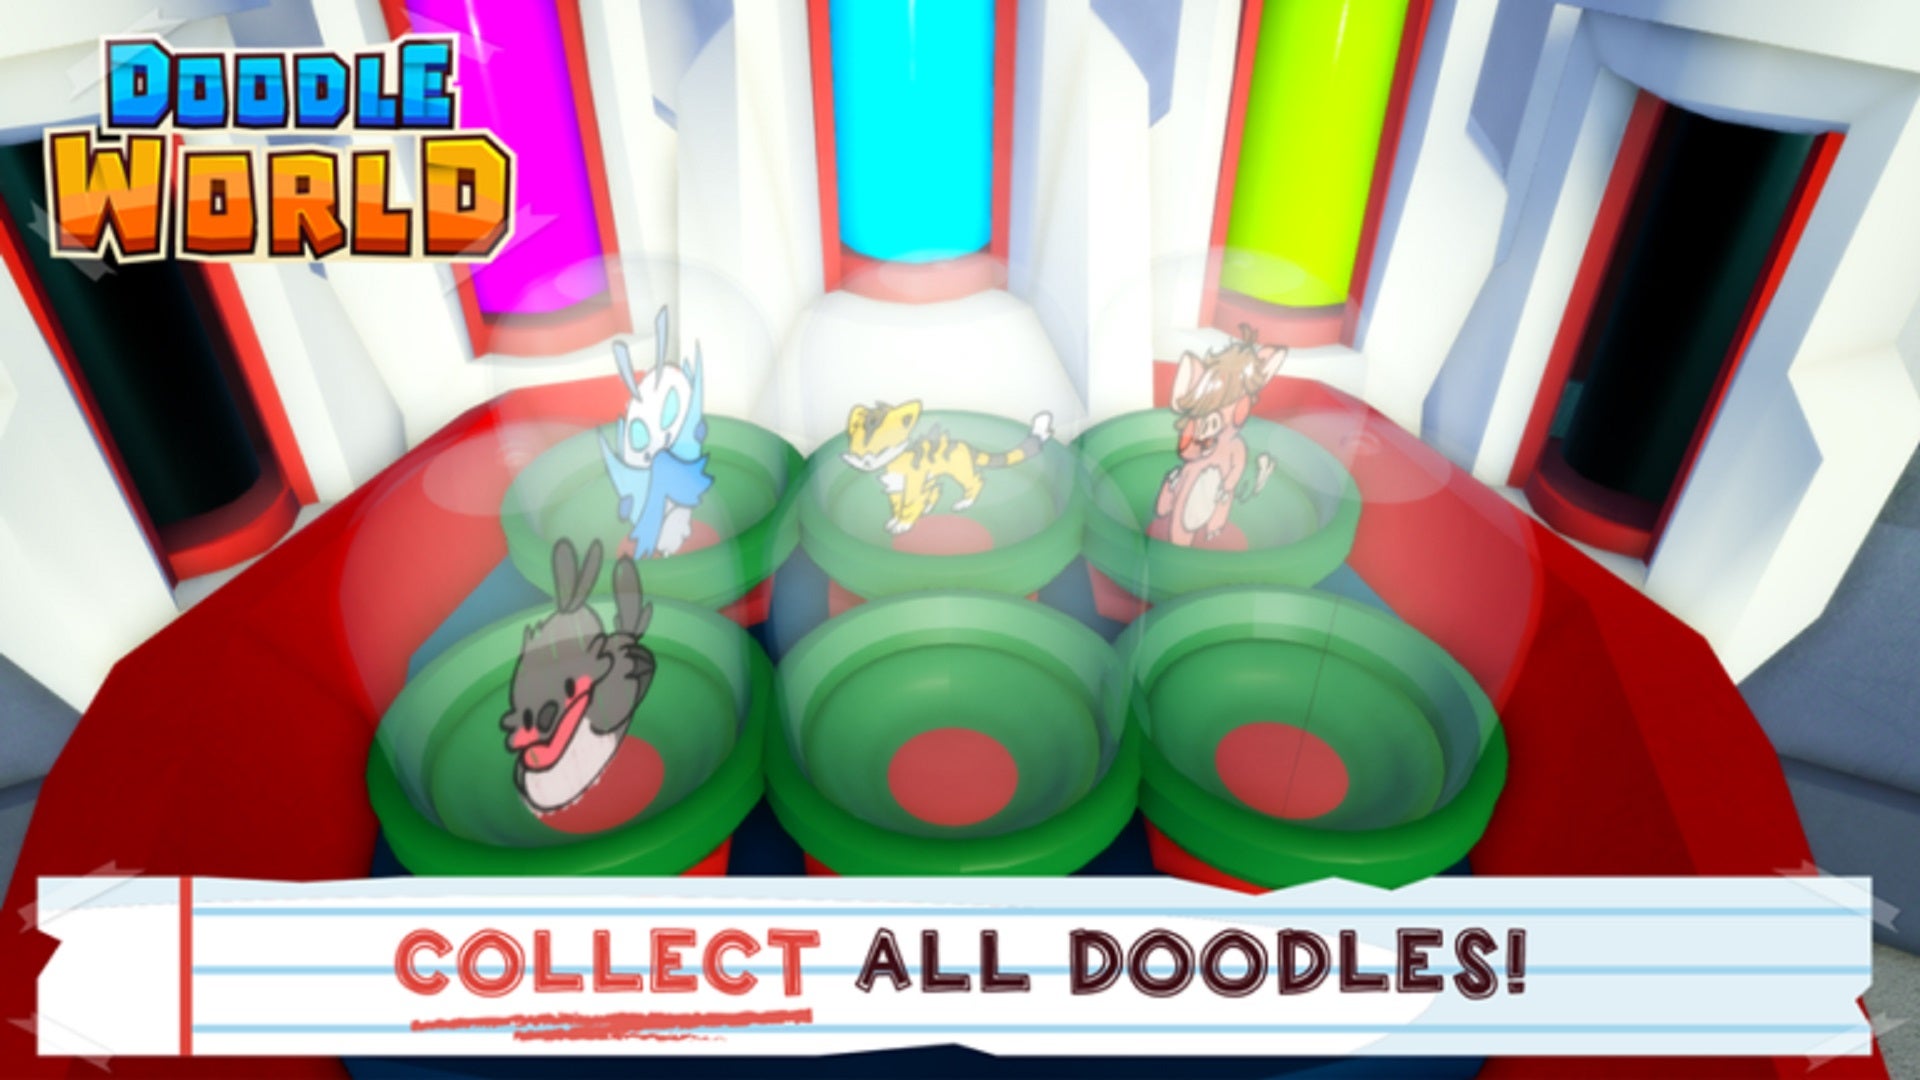 One of the banners for Doodle World as featured on the Roblox platform, showing four animal-like Doodles in their gachapon capsules and the tag line "Collect All Doodles!"